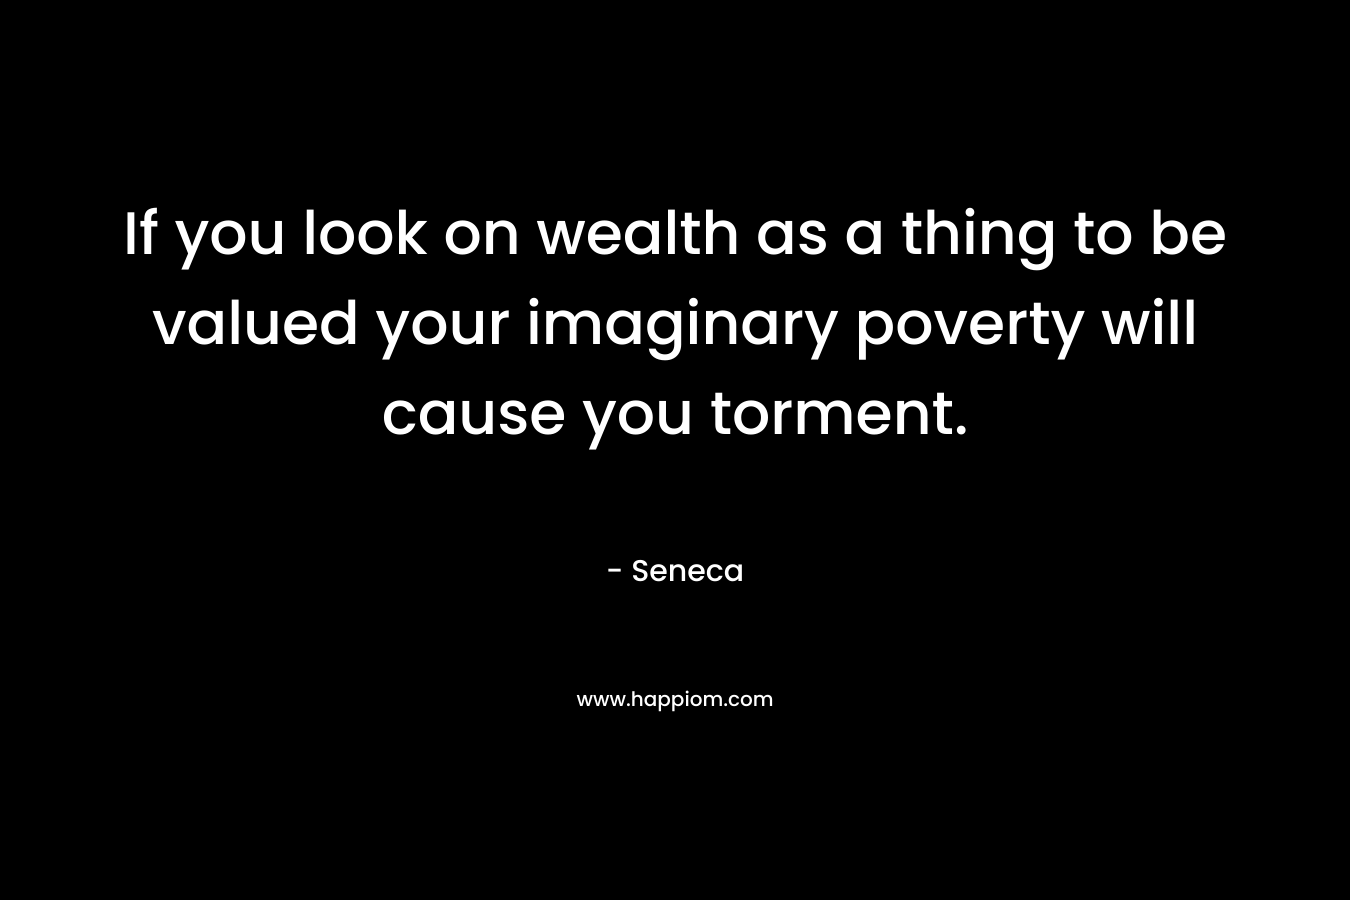 If you look on wealth as a thing to be valued your imaginary poverty will cause you torment.